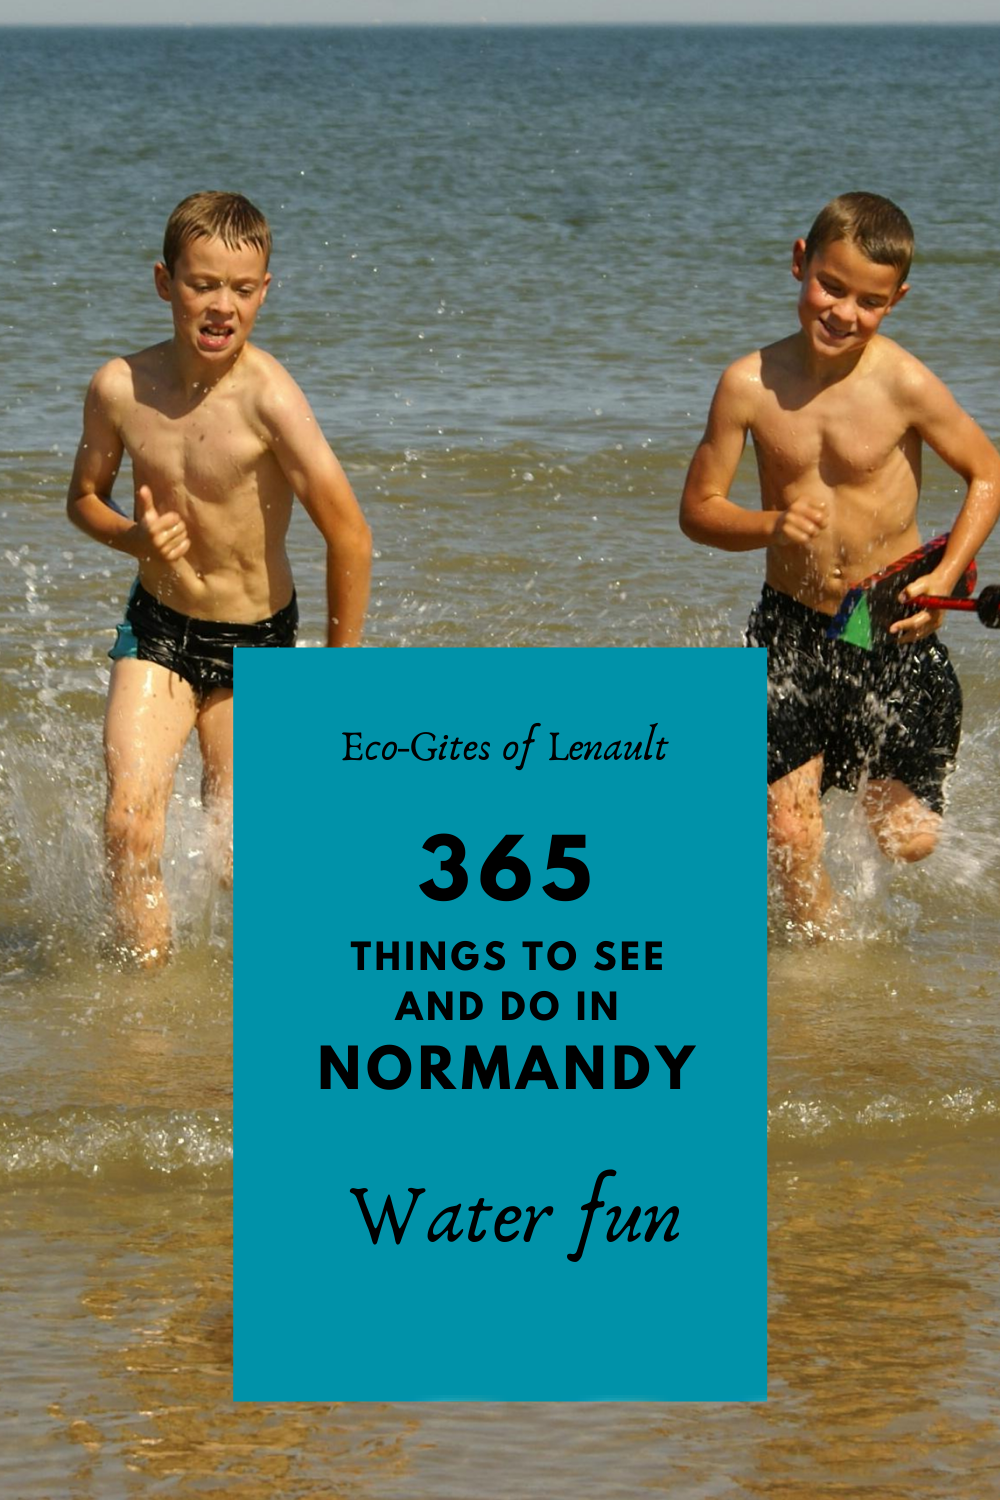 Water fun in Normandy, France